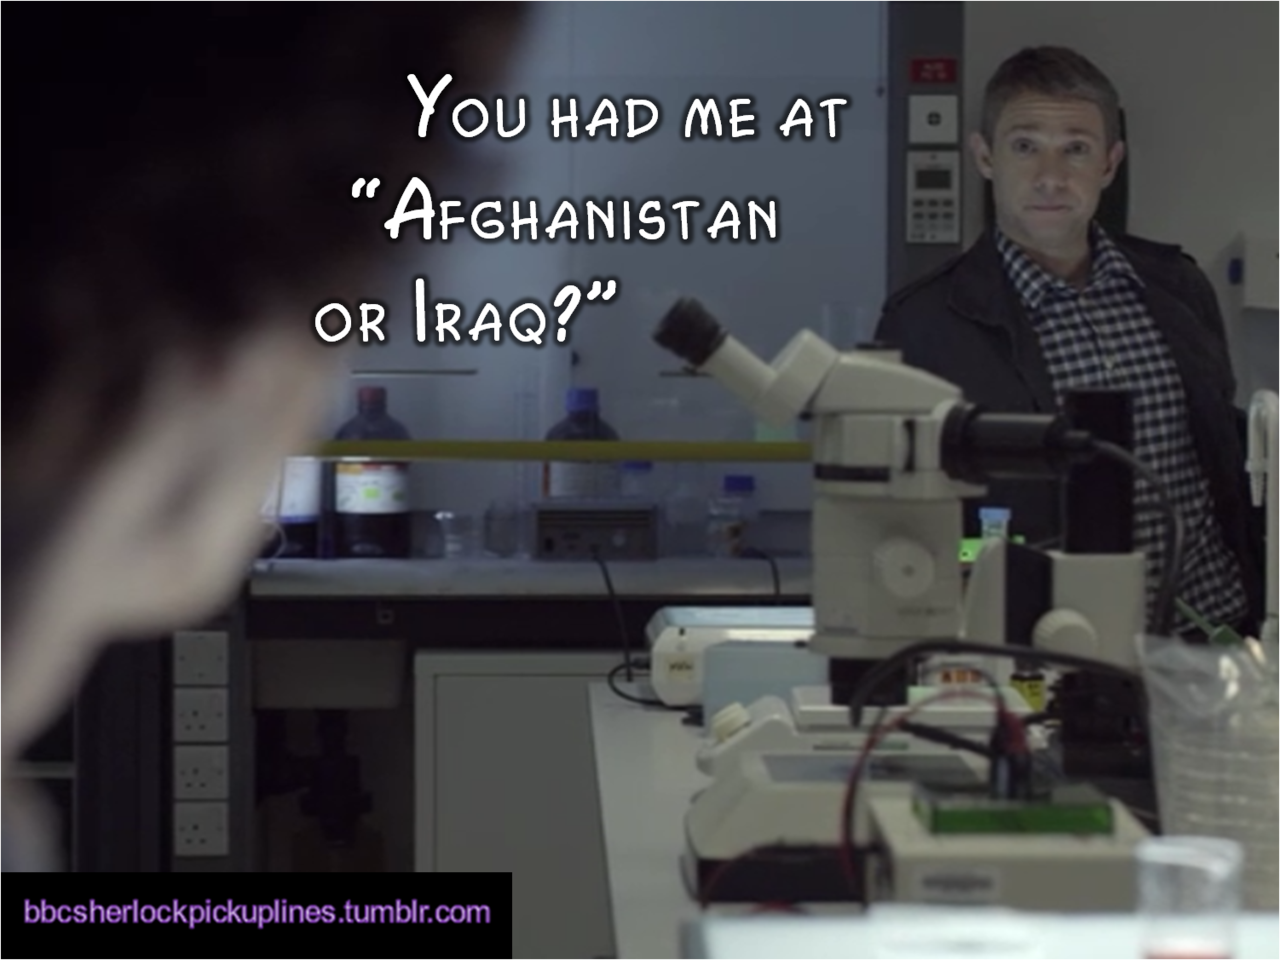 &ldquo;You had me at &lsquo;Afghanistan or Iraq?&rsquo;&rdquo; Submitted